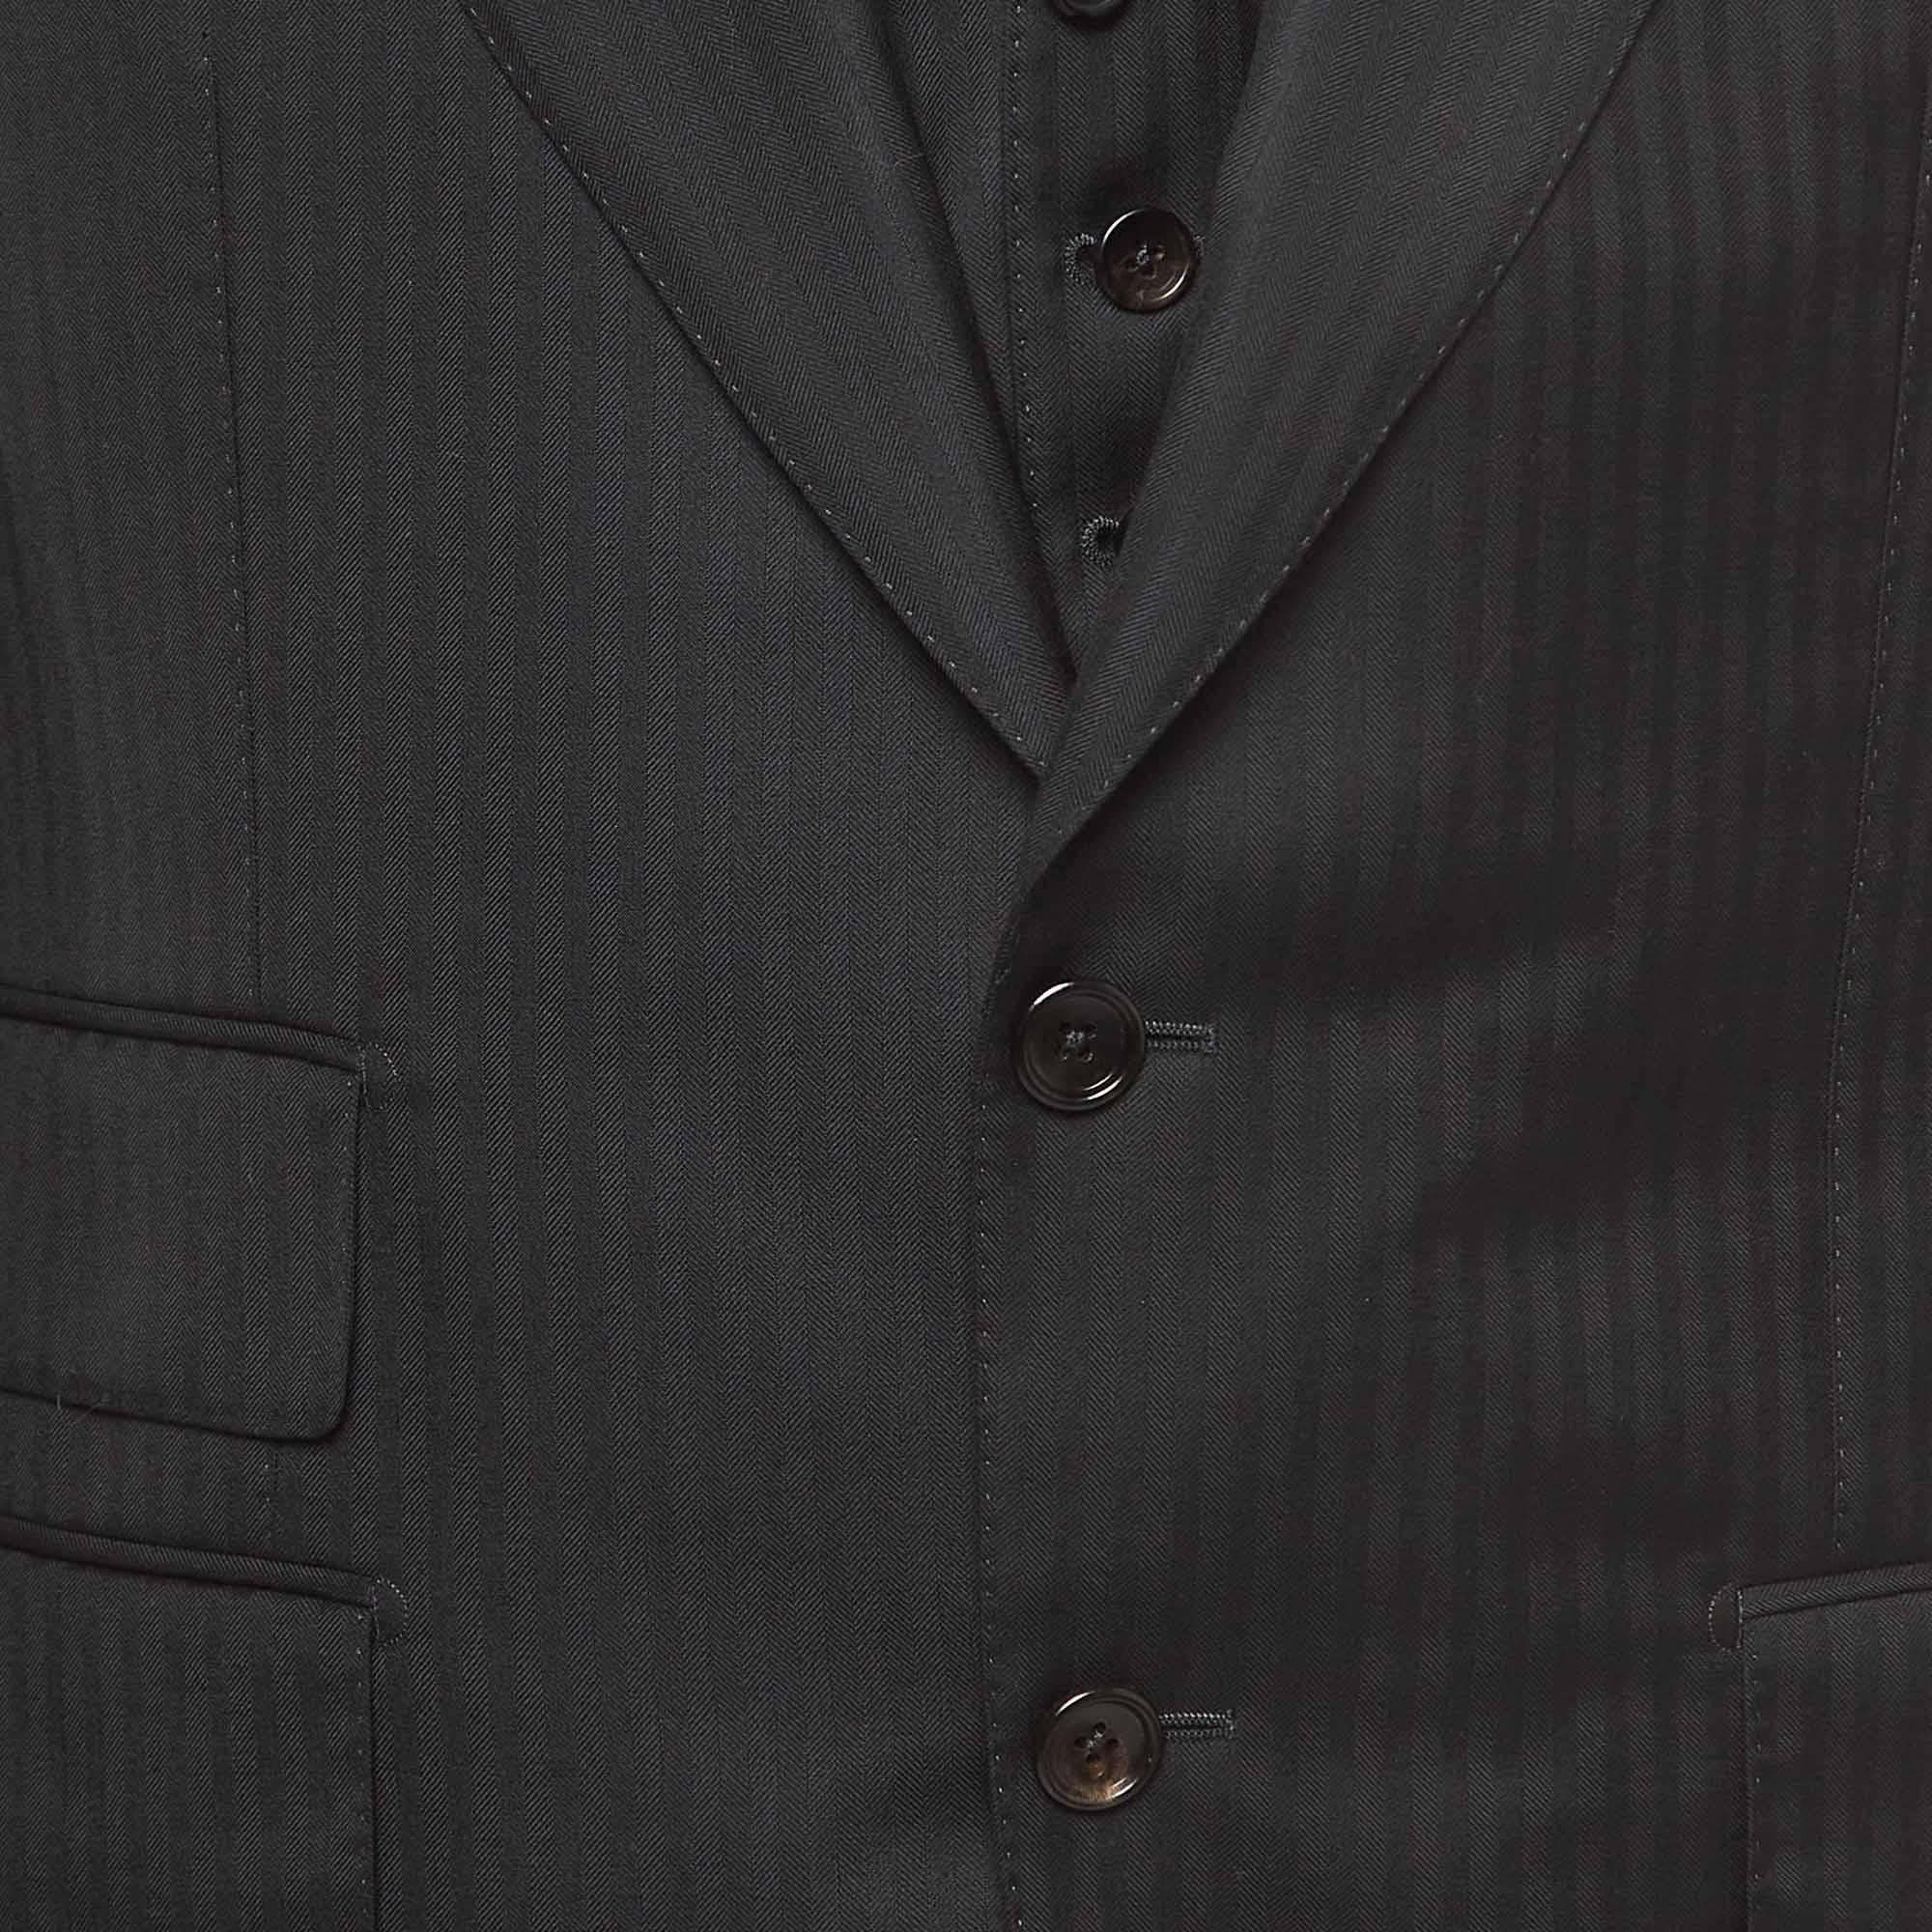 Tom Ford Black Pinstripe Wool Single Breasted 3 Pieces Suit XL Pour hommes en vente